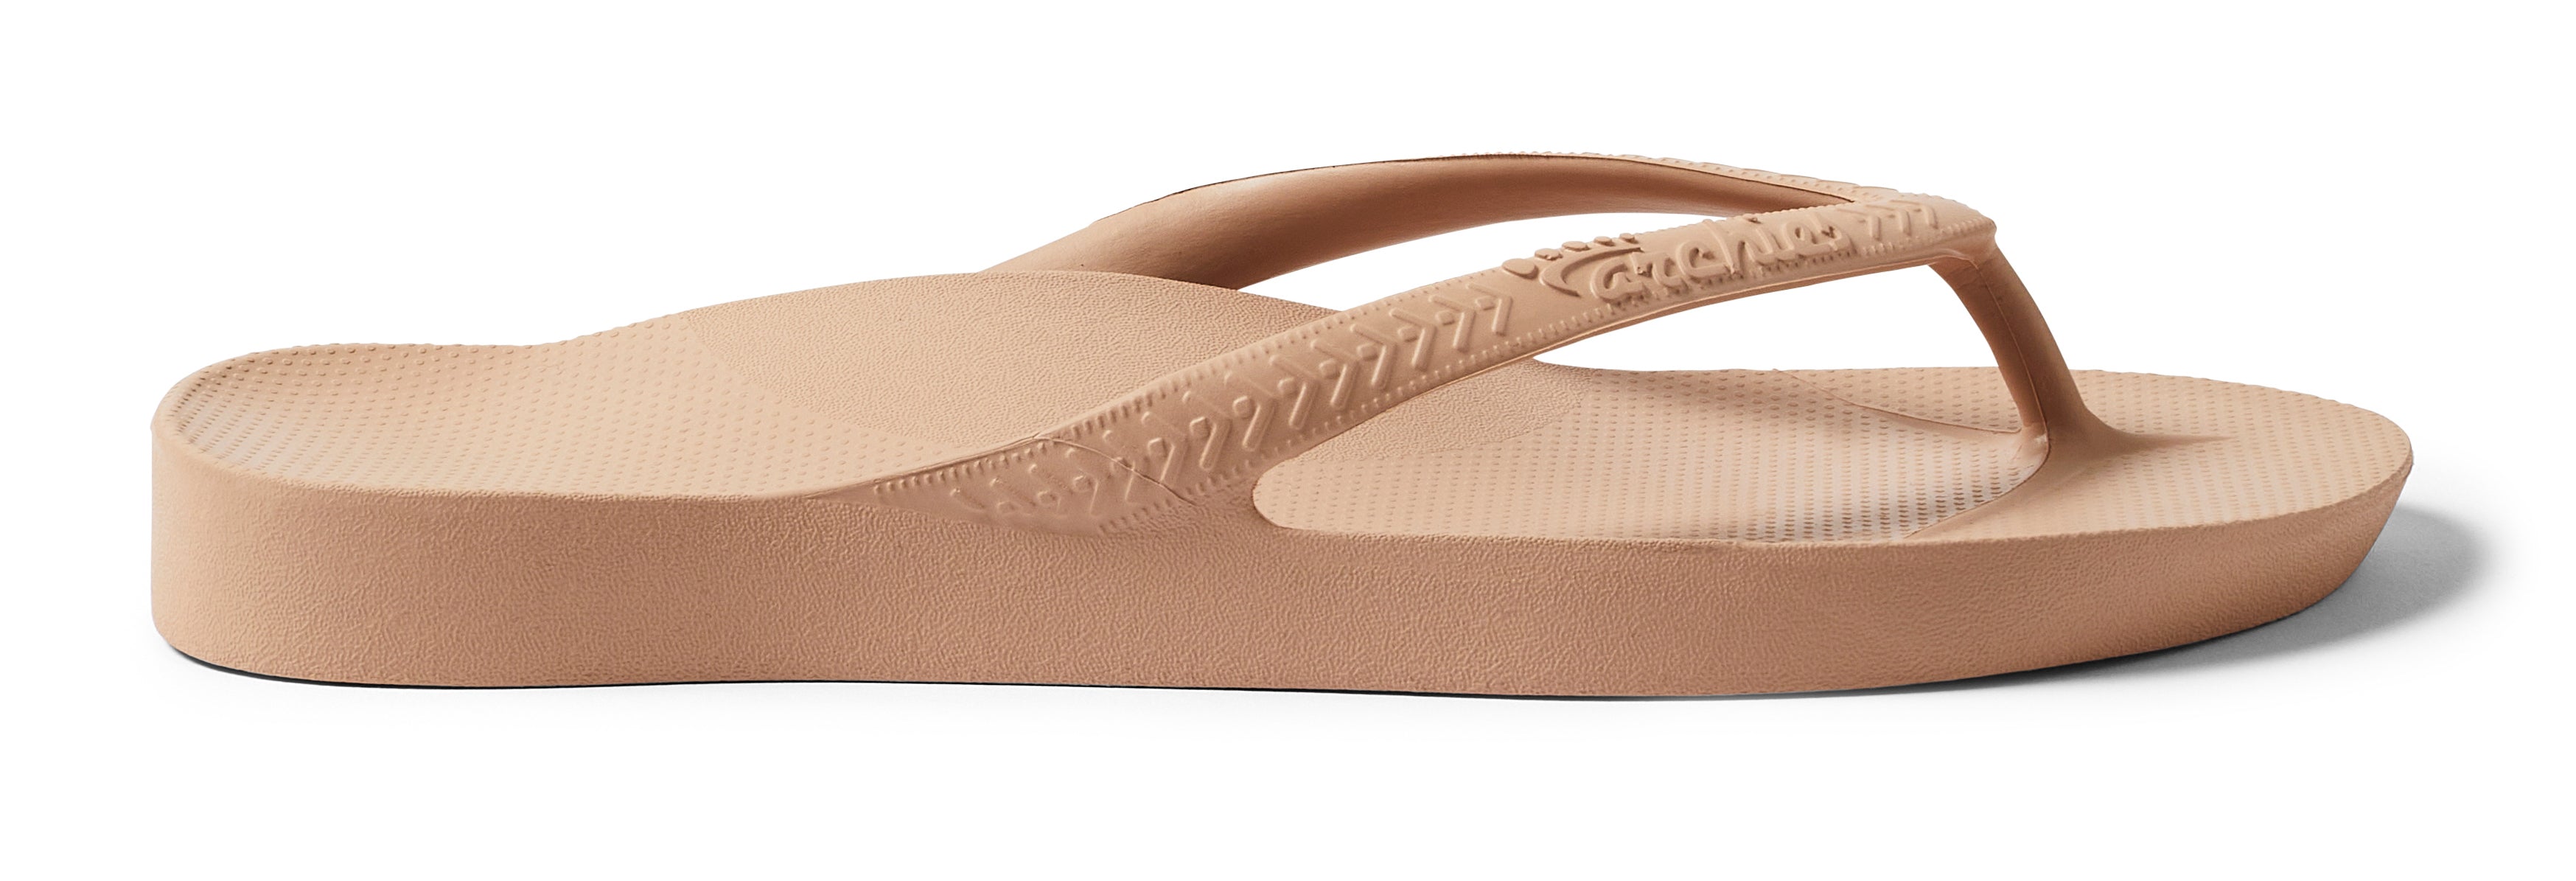 Archies Footwear Arch Support Flops & Footwear – Archies LLC | United States